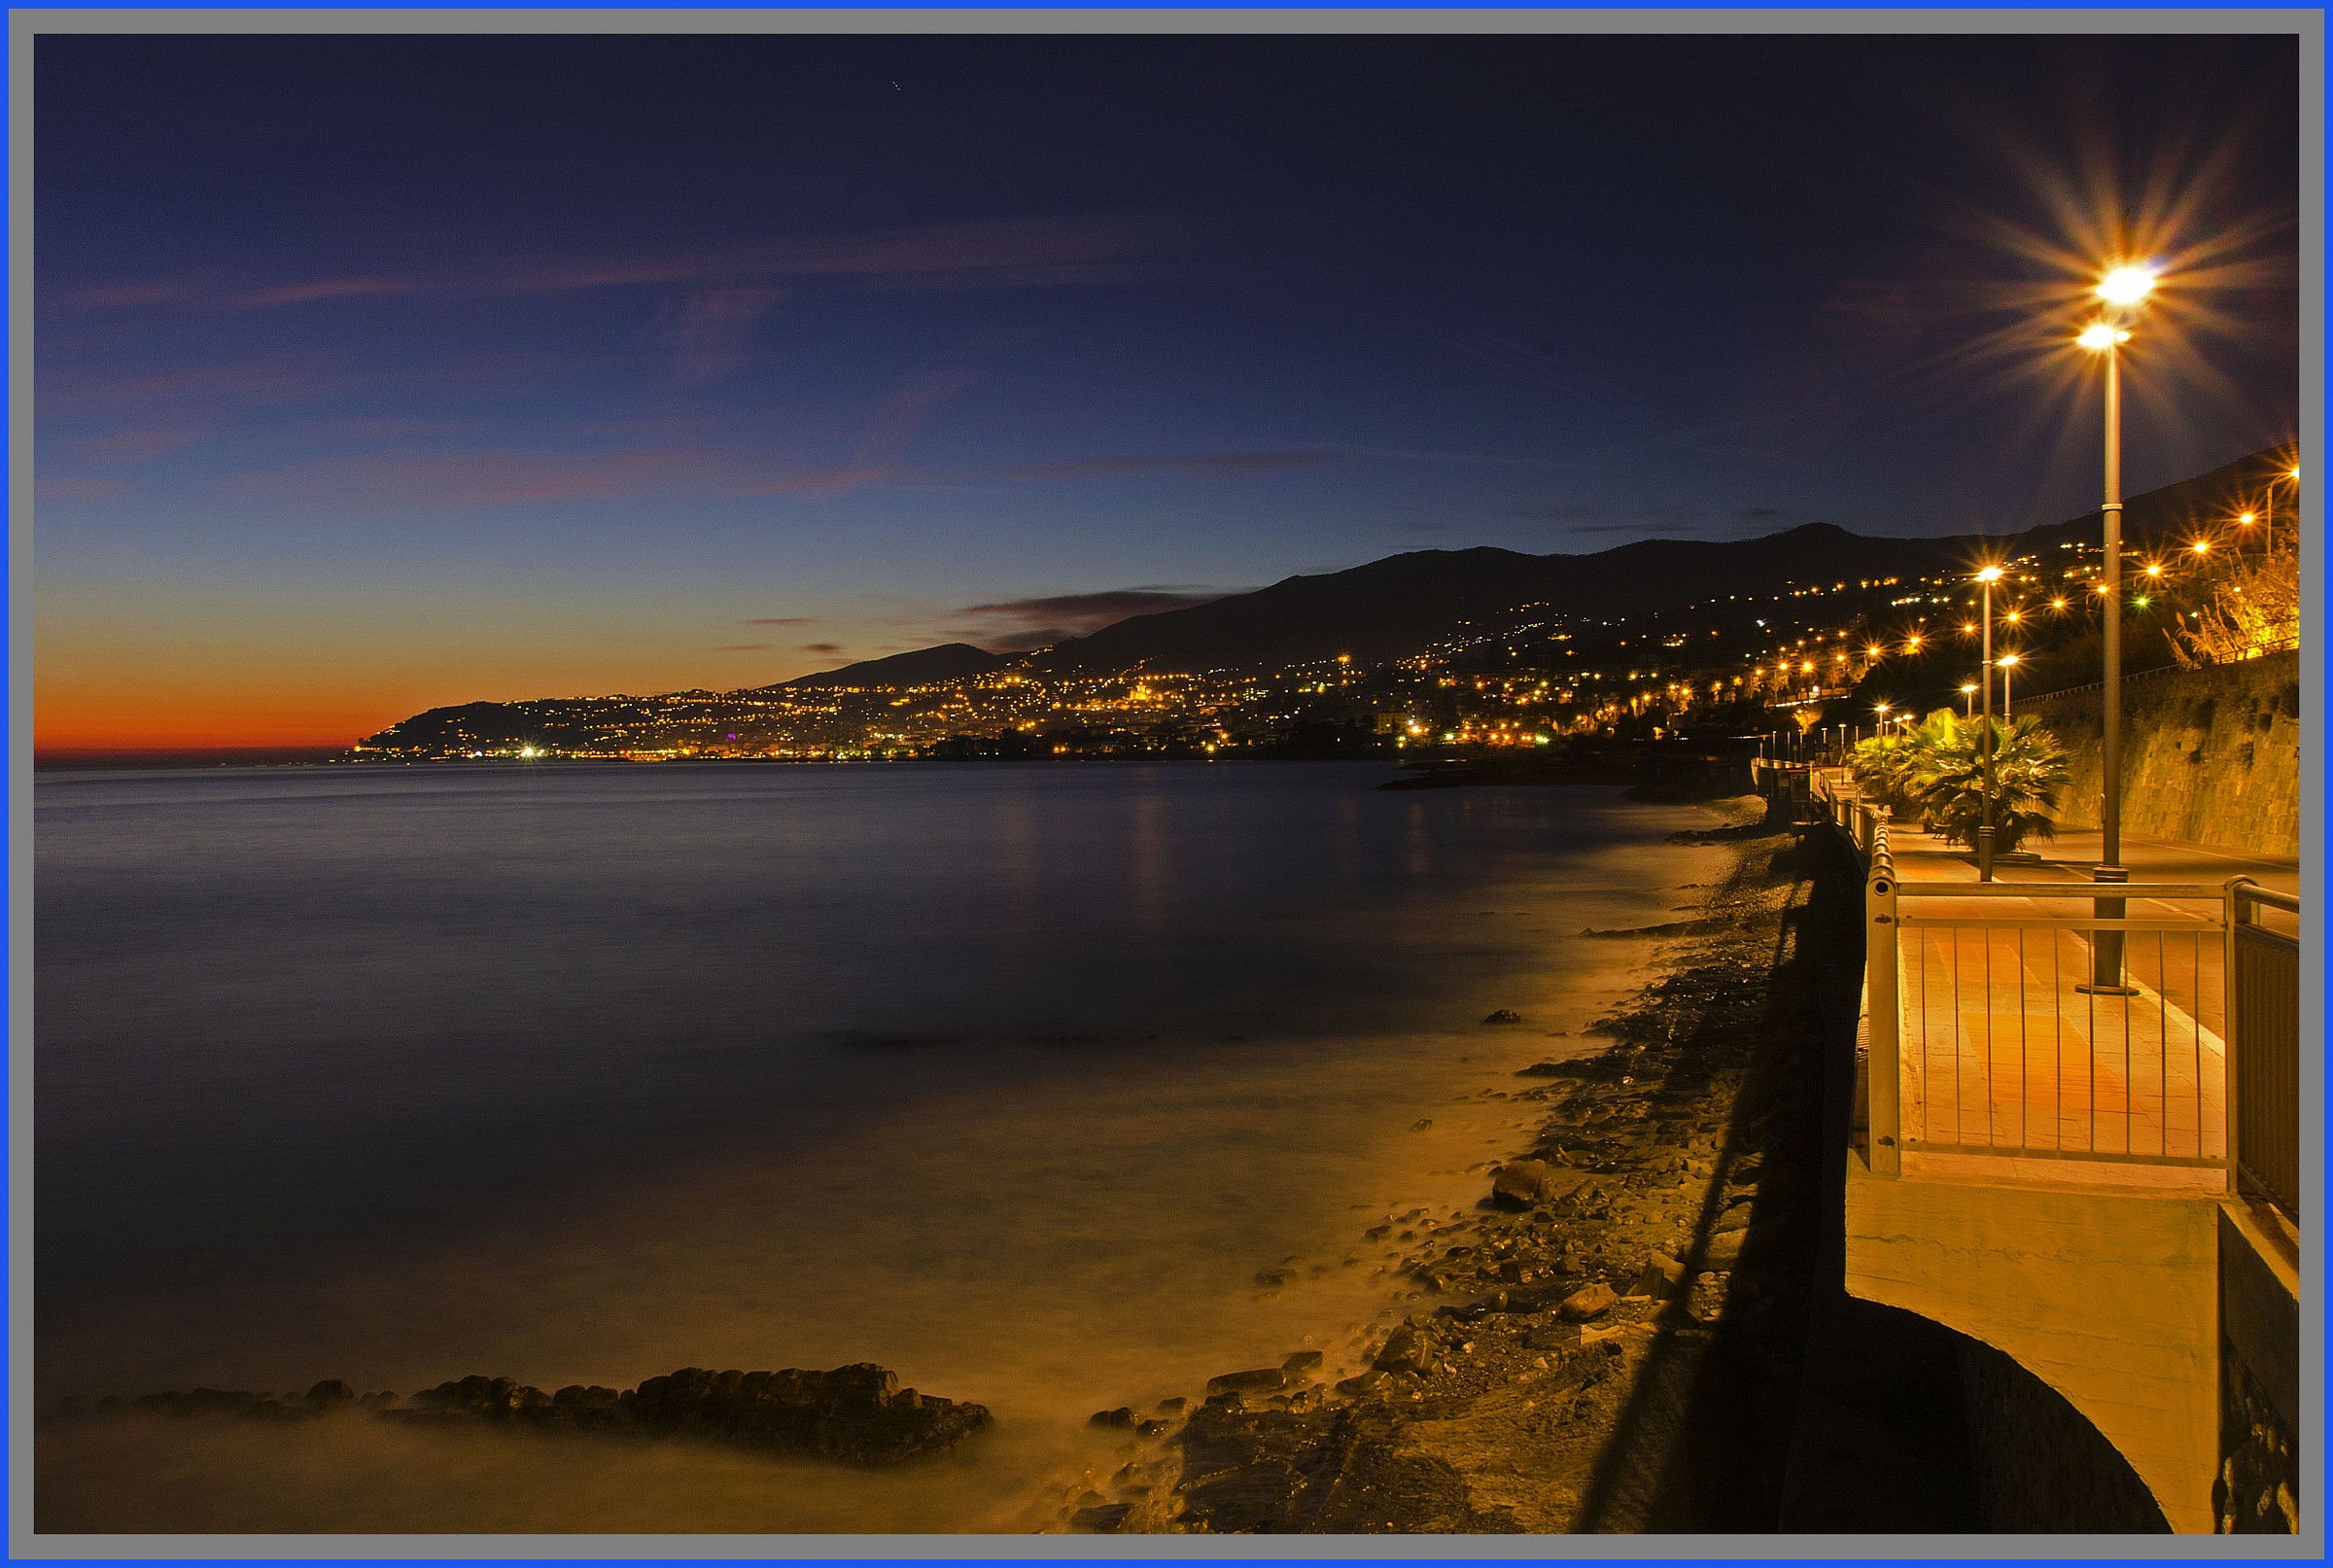 Sunset over Sanremo...